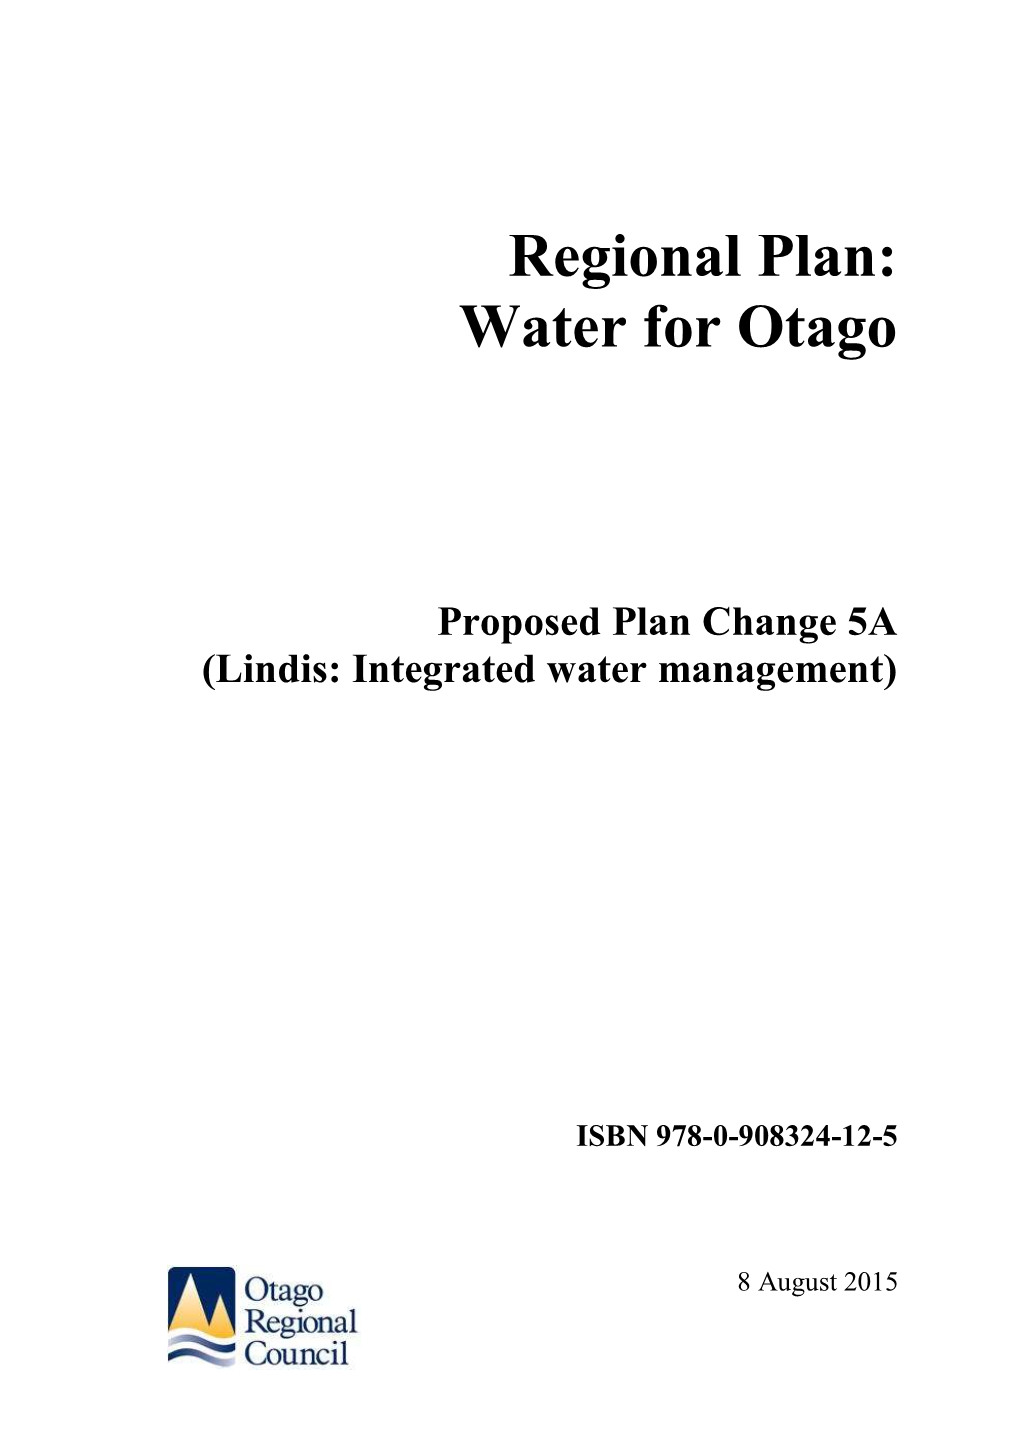 Proposed Plan Change 5A (Lindis: Integrated Water Management)